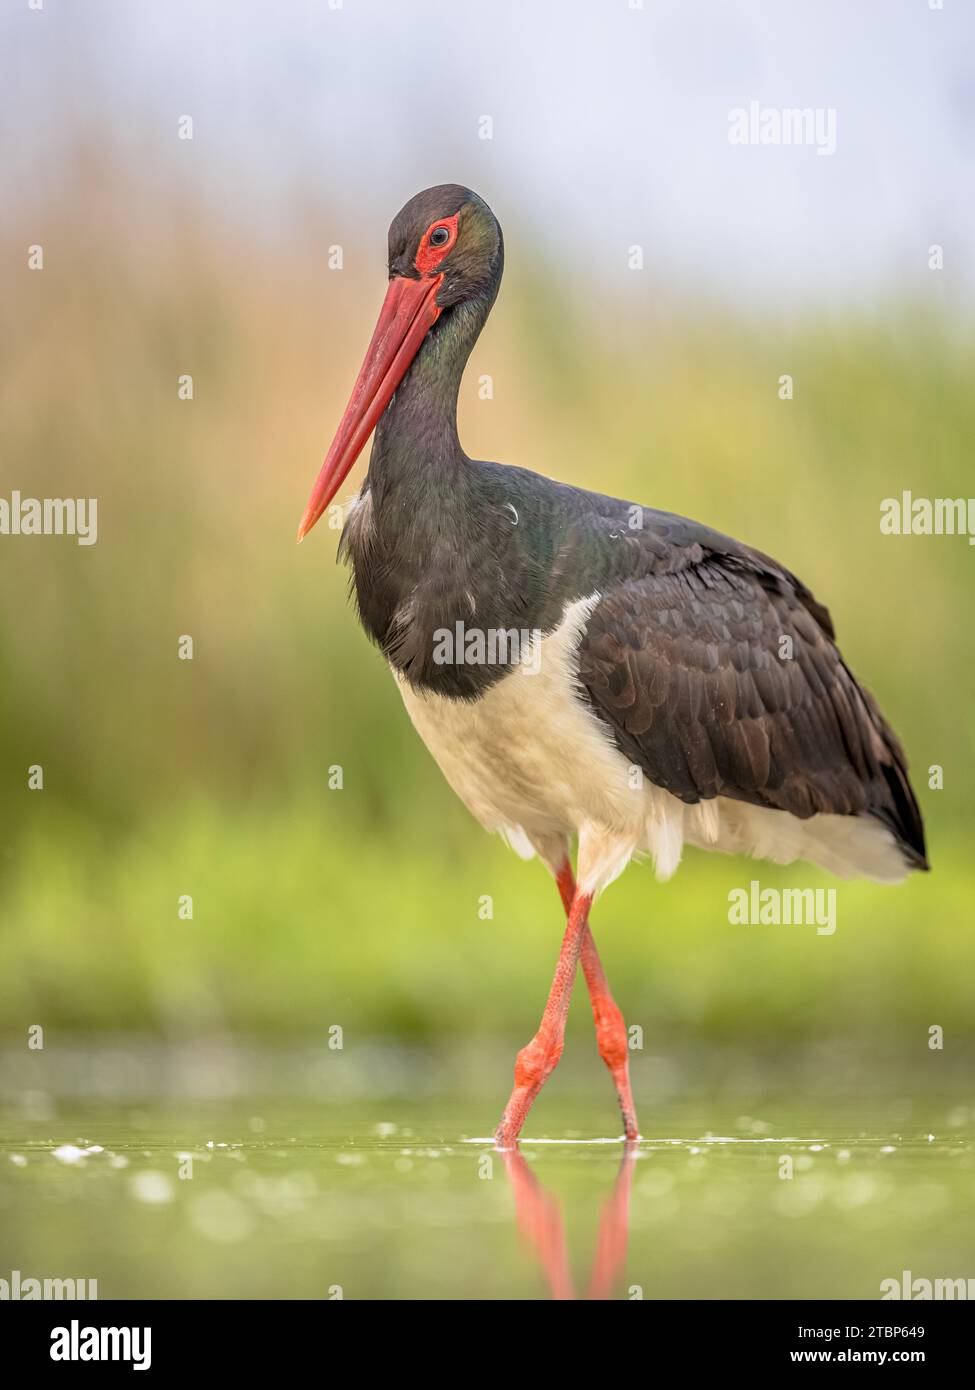 Black stork (Ciconia nigra) looking for food in shallow water of natural habitat. Hungary. Wildlife scene of nature in Europe. Stock Photo